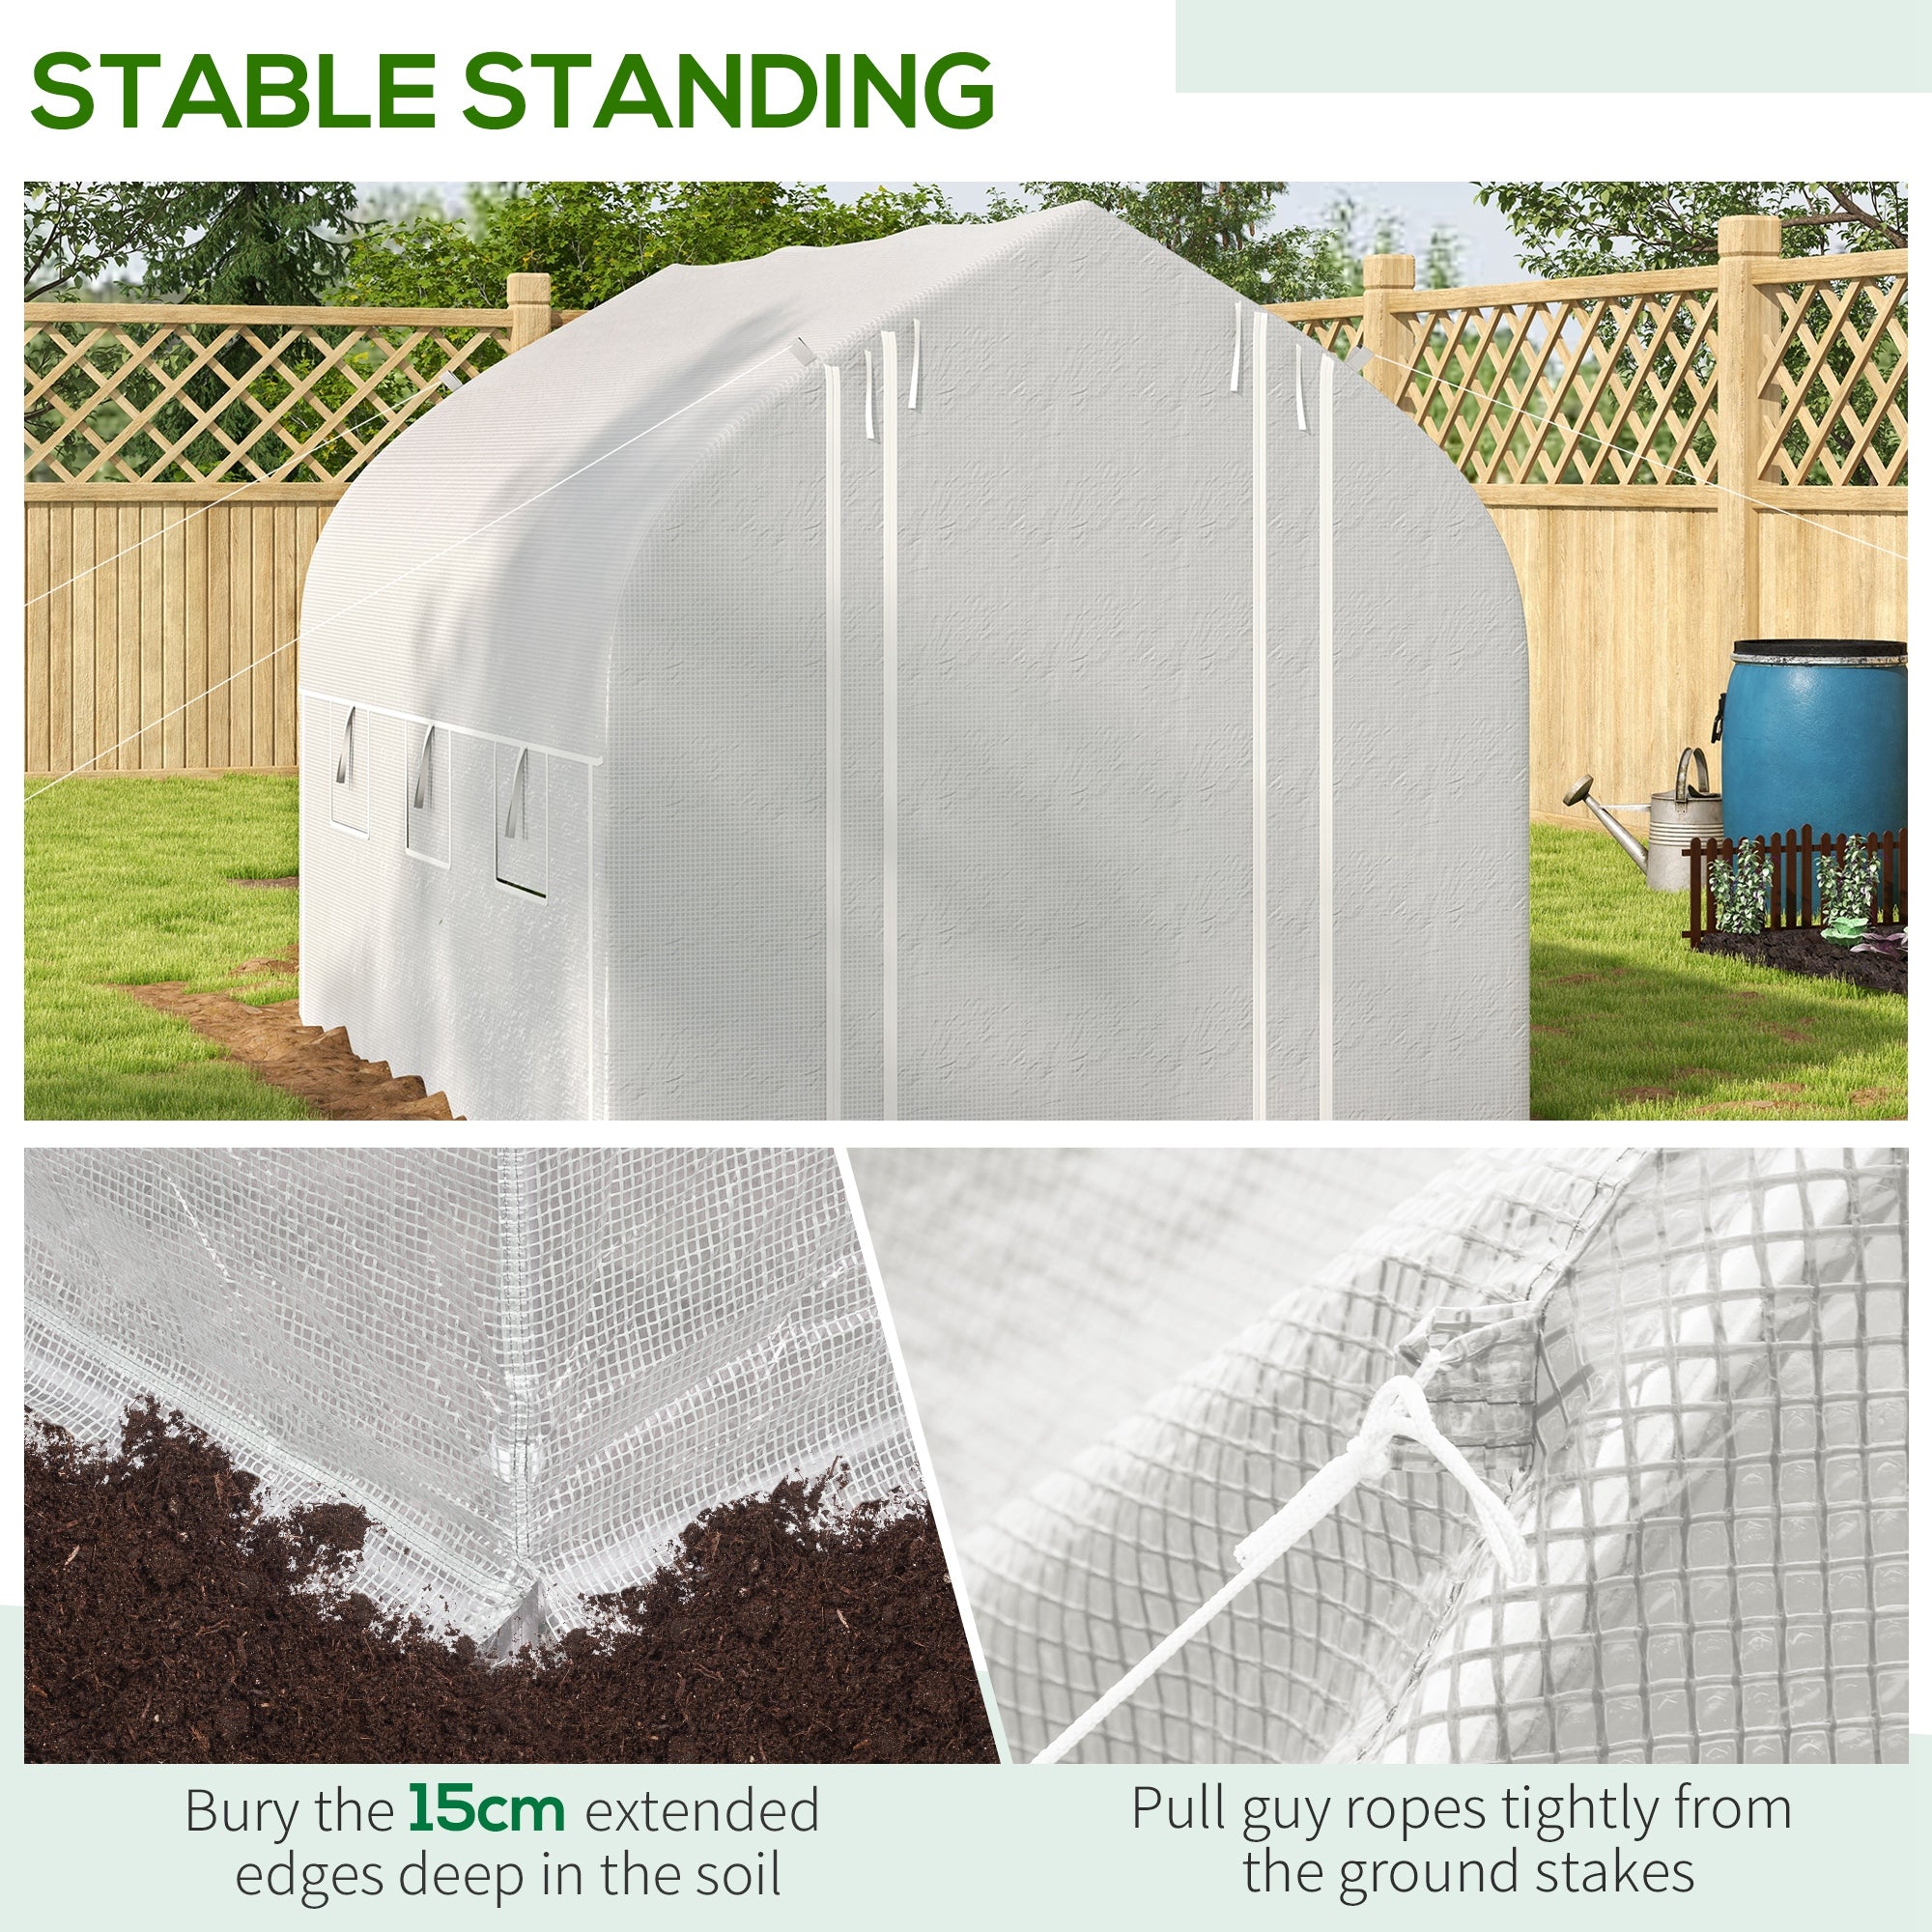 Outsunny 3 x 2m Walk-in Polytunnel Greenhouse, Zipped Roll Up Sidewalls, Mesh Door, 6 Mesh Windows, Tunnel Warm House Tent with PE Cover, Complimentary Plant Labels and Gloves, White